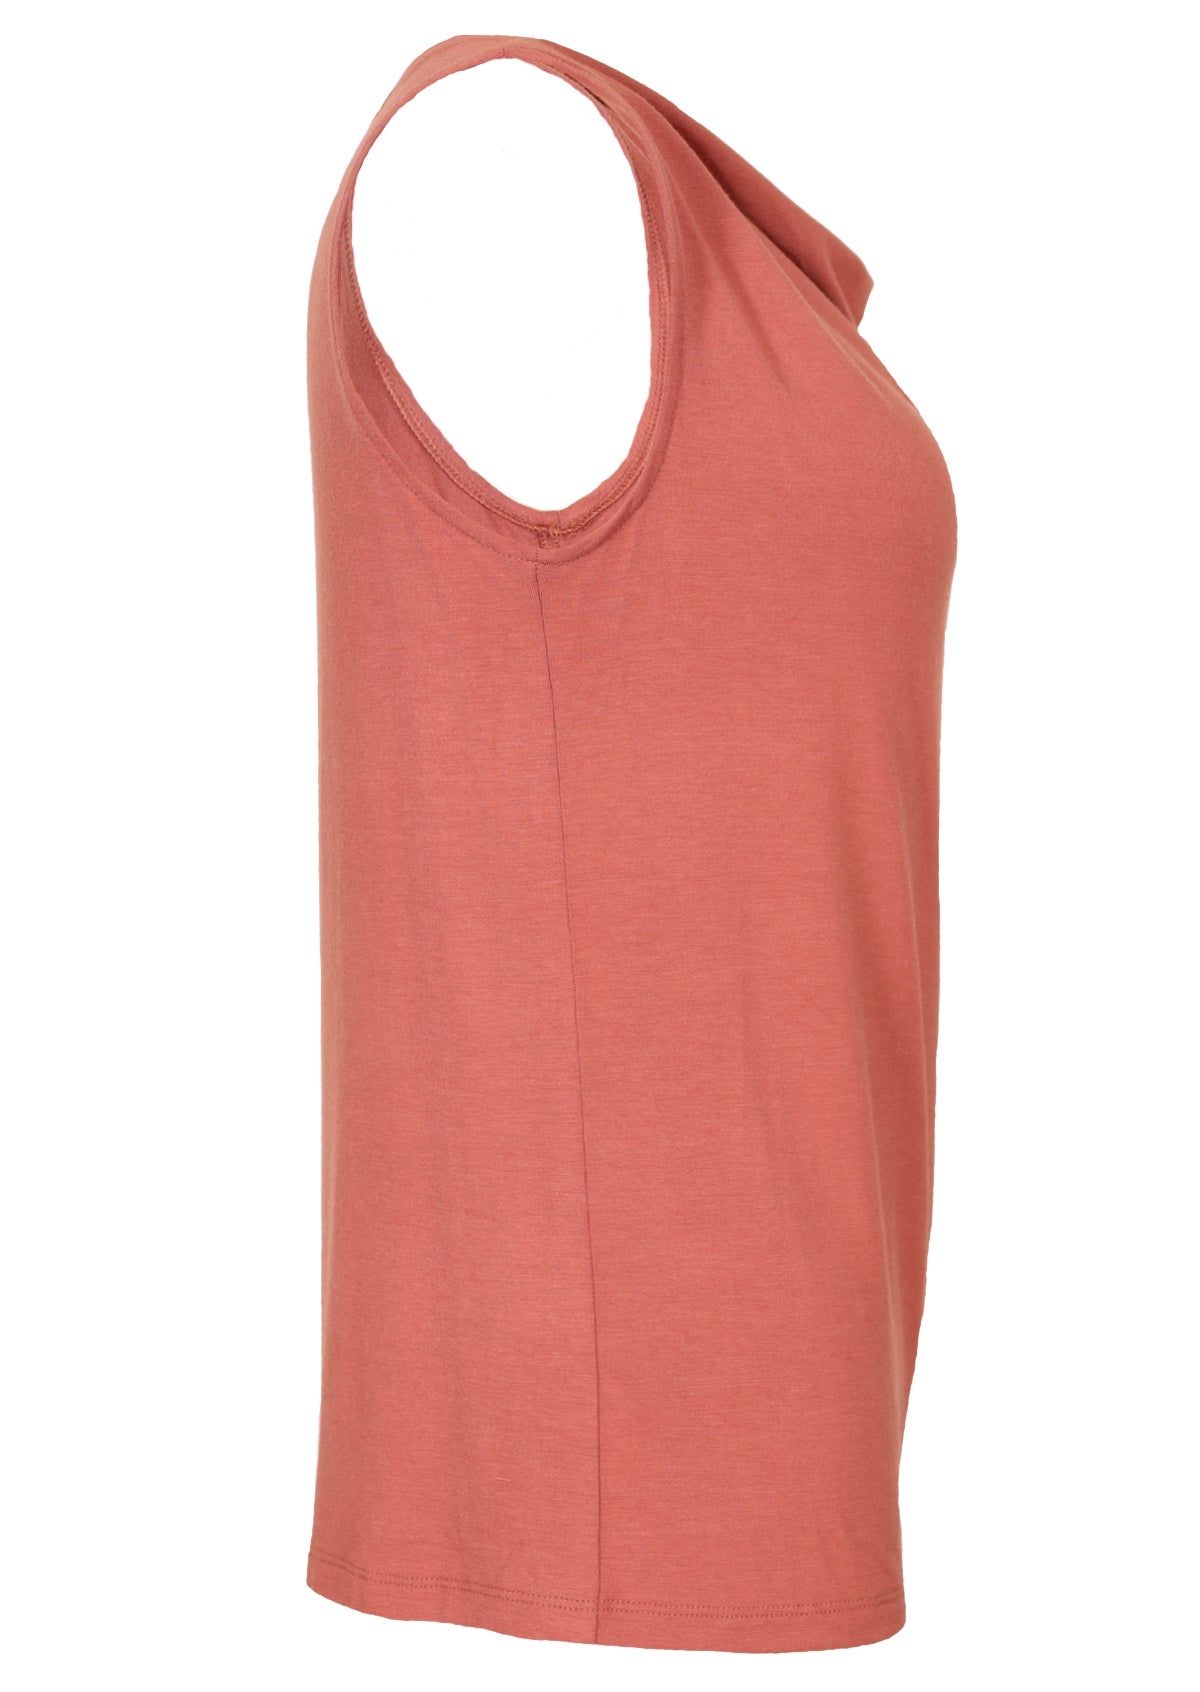 side view sleeveless stretch jersey women's top